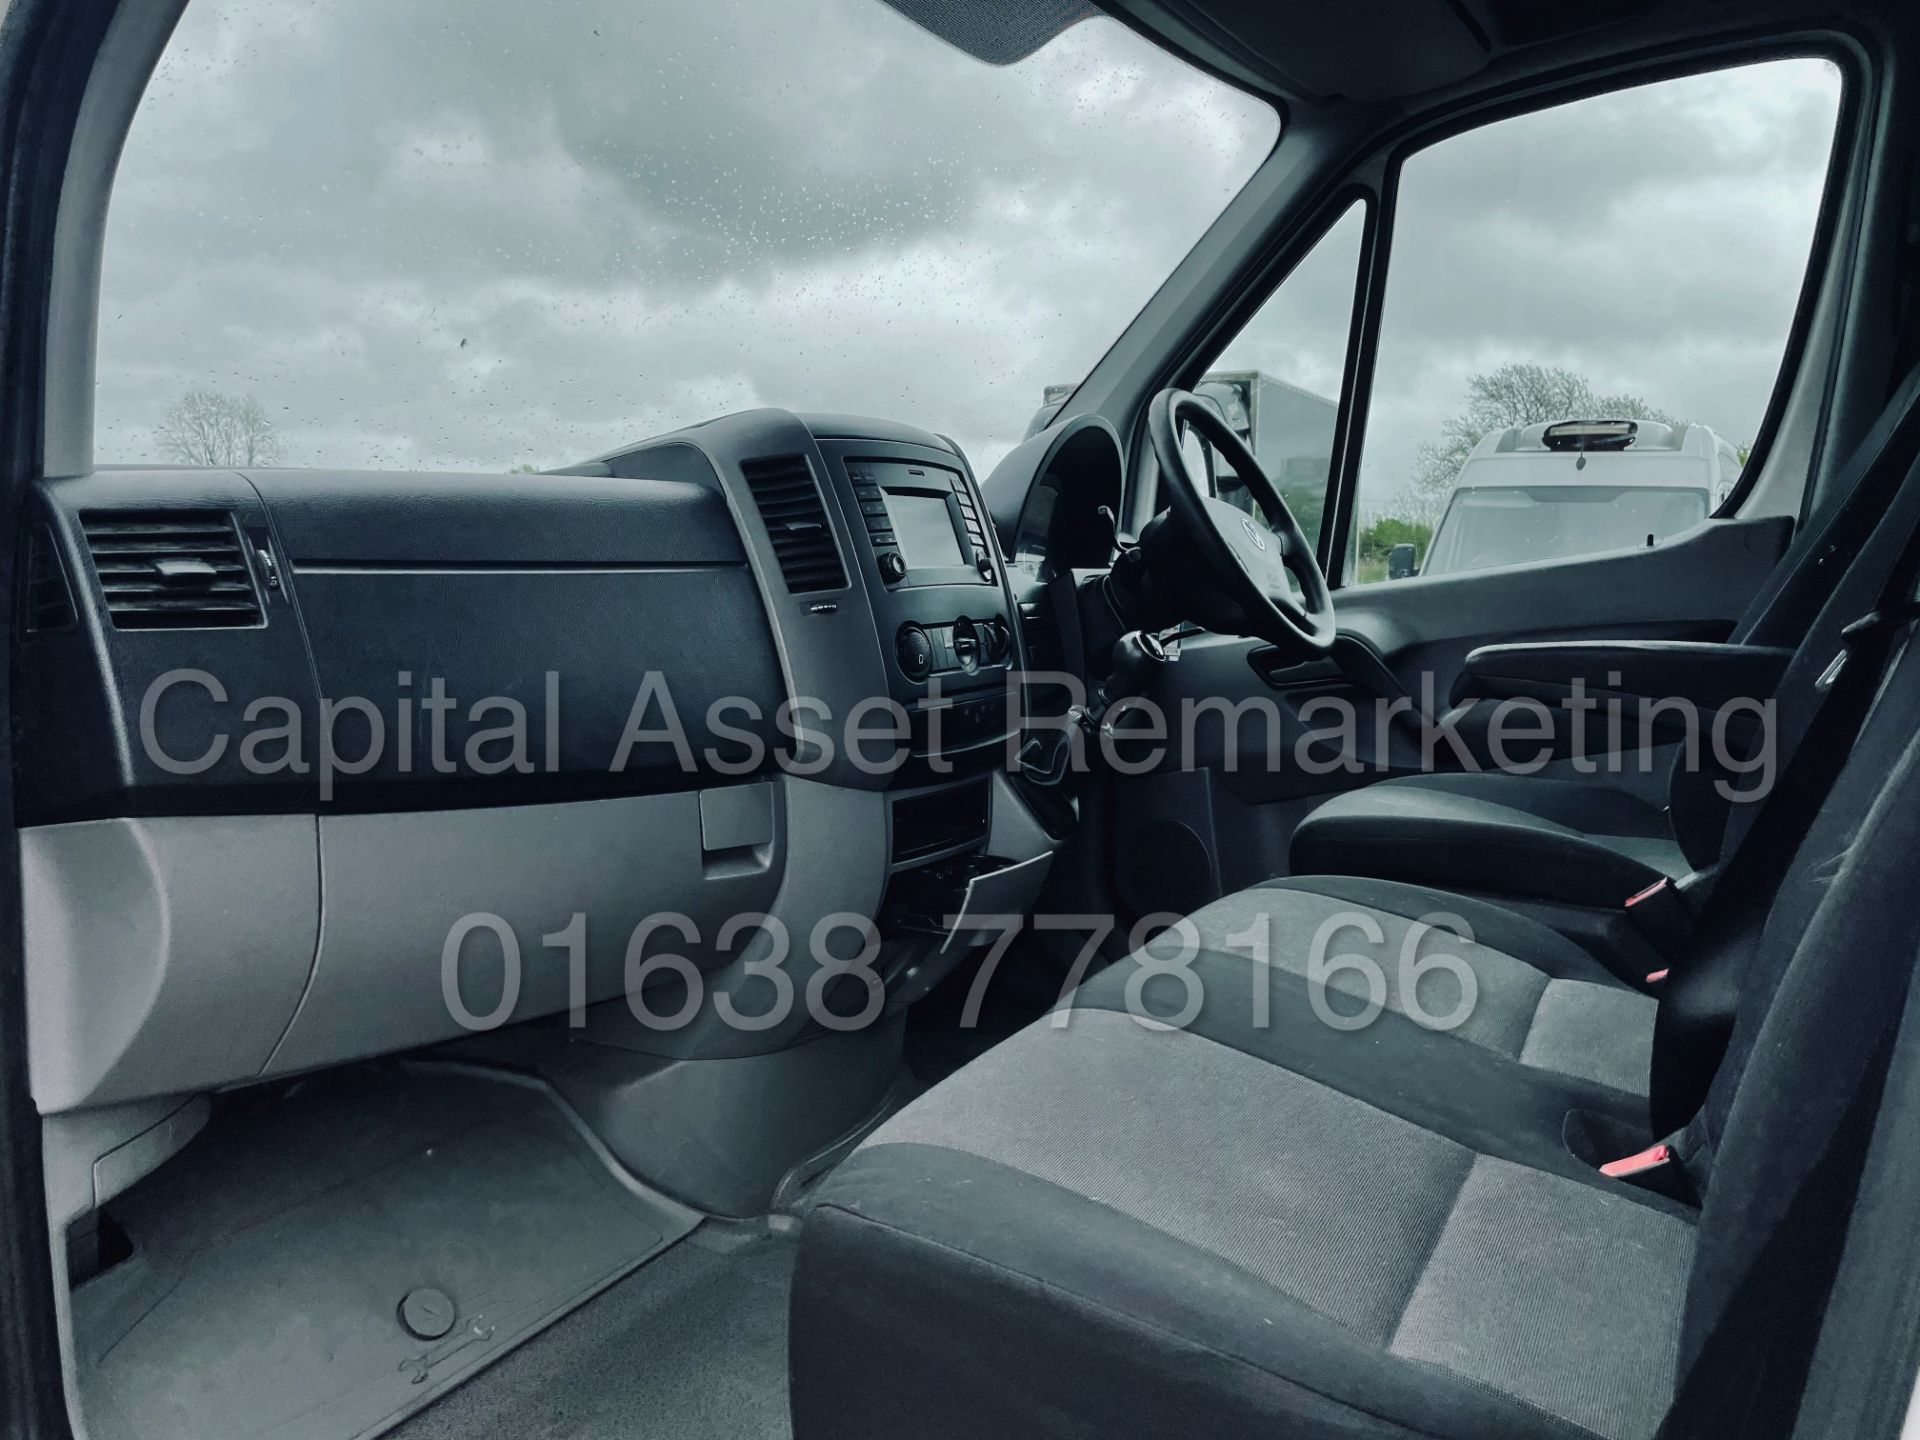 (On Sale) VOLKSWAGEN CRAFTER *LWB HI-ROOF* (2017 - EURO 6) '2.0 TDI BMT - 6 SPEED' *CRUISE CONTROL* - Image 20 of 39